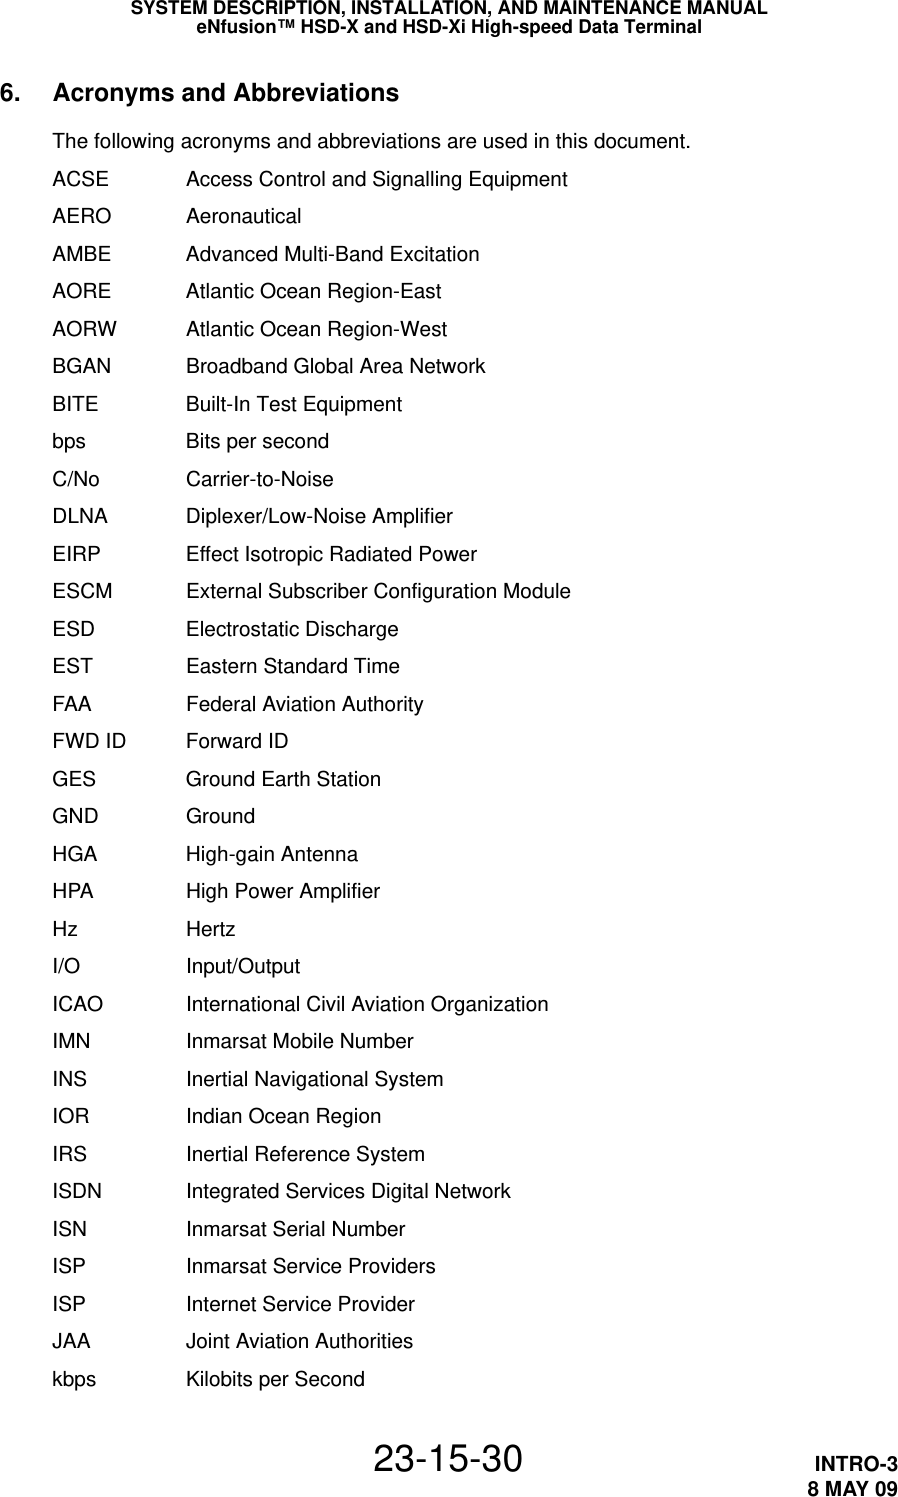 SYSTEM DESCRIPTION, INSTALLATION, AND MAINTENANCE MANUALeNfusion™ HSD-X and HSD-Xi High-speed Data Terminal23-15-30 INTRO-38 MAY 096. Acronyms and AbbreviationsThe following acronyms and abbreviations are used in this document.ACSE Access Control and Signalling EquipmentAERO AeronauticalAMBE Advanced Multi-Band ExcitationAORE Atlantic Ocean Region-EastAORW Atlantic Ocean Region-WestBGAN Broadband Global Area NetworkBITE Built-In Test Equipmentbps Bits per secondC/No Carrier-to-NoiseDLNA Diplexer/Low-Noise AmplifierEIRP Effect Isotropic Radiated PowerESCM External Subscriber Configuration ModuleESD Electrostatic DischargeEST Eastern Standard TimeFAA Federal Aviation AuthorityFWD ID Forward IDGES Ground Earth StationGND GroundHGA High-gain AntennaHPA High Power AmplifierHz HertzI/O Input/OutputICAO International Civil Aviation OrganizationIMN Inmarsat Mobile NumberINS Inertial Navigational SystemIOR Indian Ocean RegionIRS Inertial Reference SystemISDN Integrated Services Digital NetworkISN Inmarsat Serial NumberISP Inmarsat Service ProvidersISP Internet Service ProviderJAA Joint Aviation Authoritieskbps Kilobits per Second